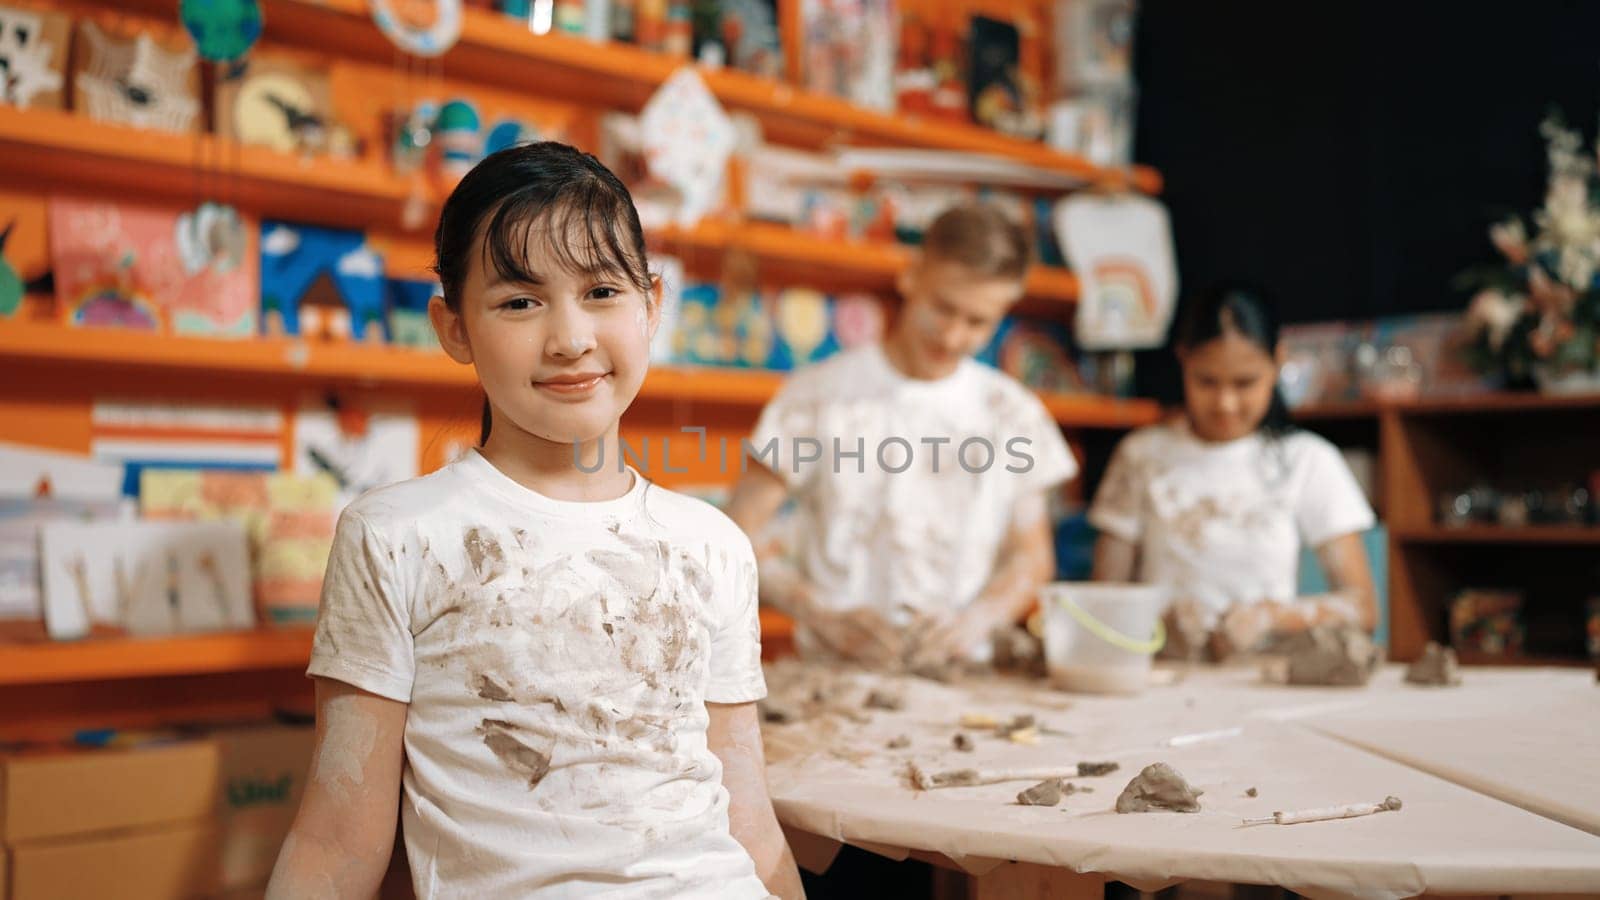 Girl look at camera and hand while diverse children modeling clay. Edification. by biancoblue